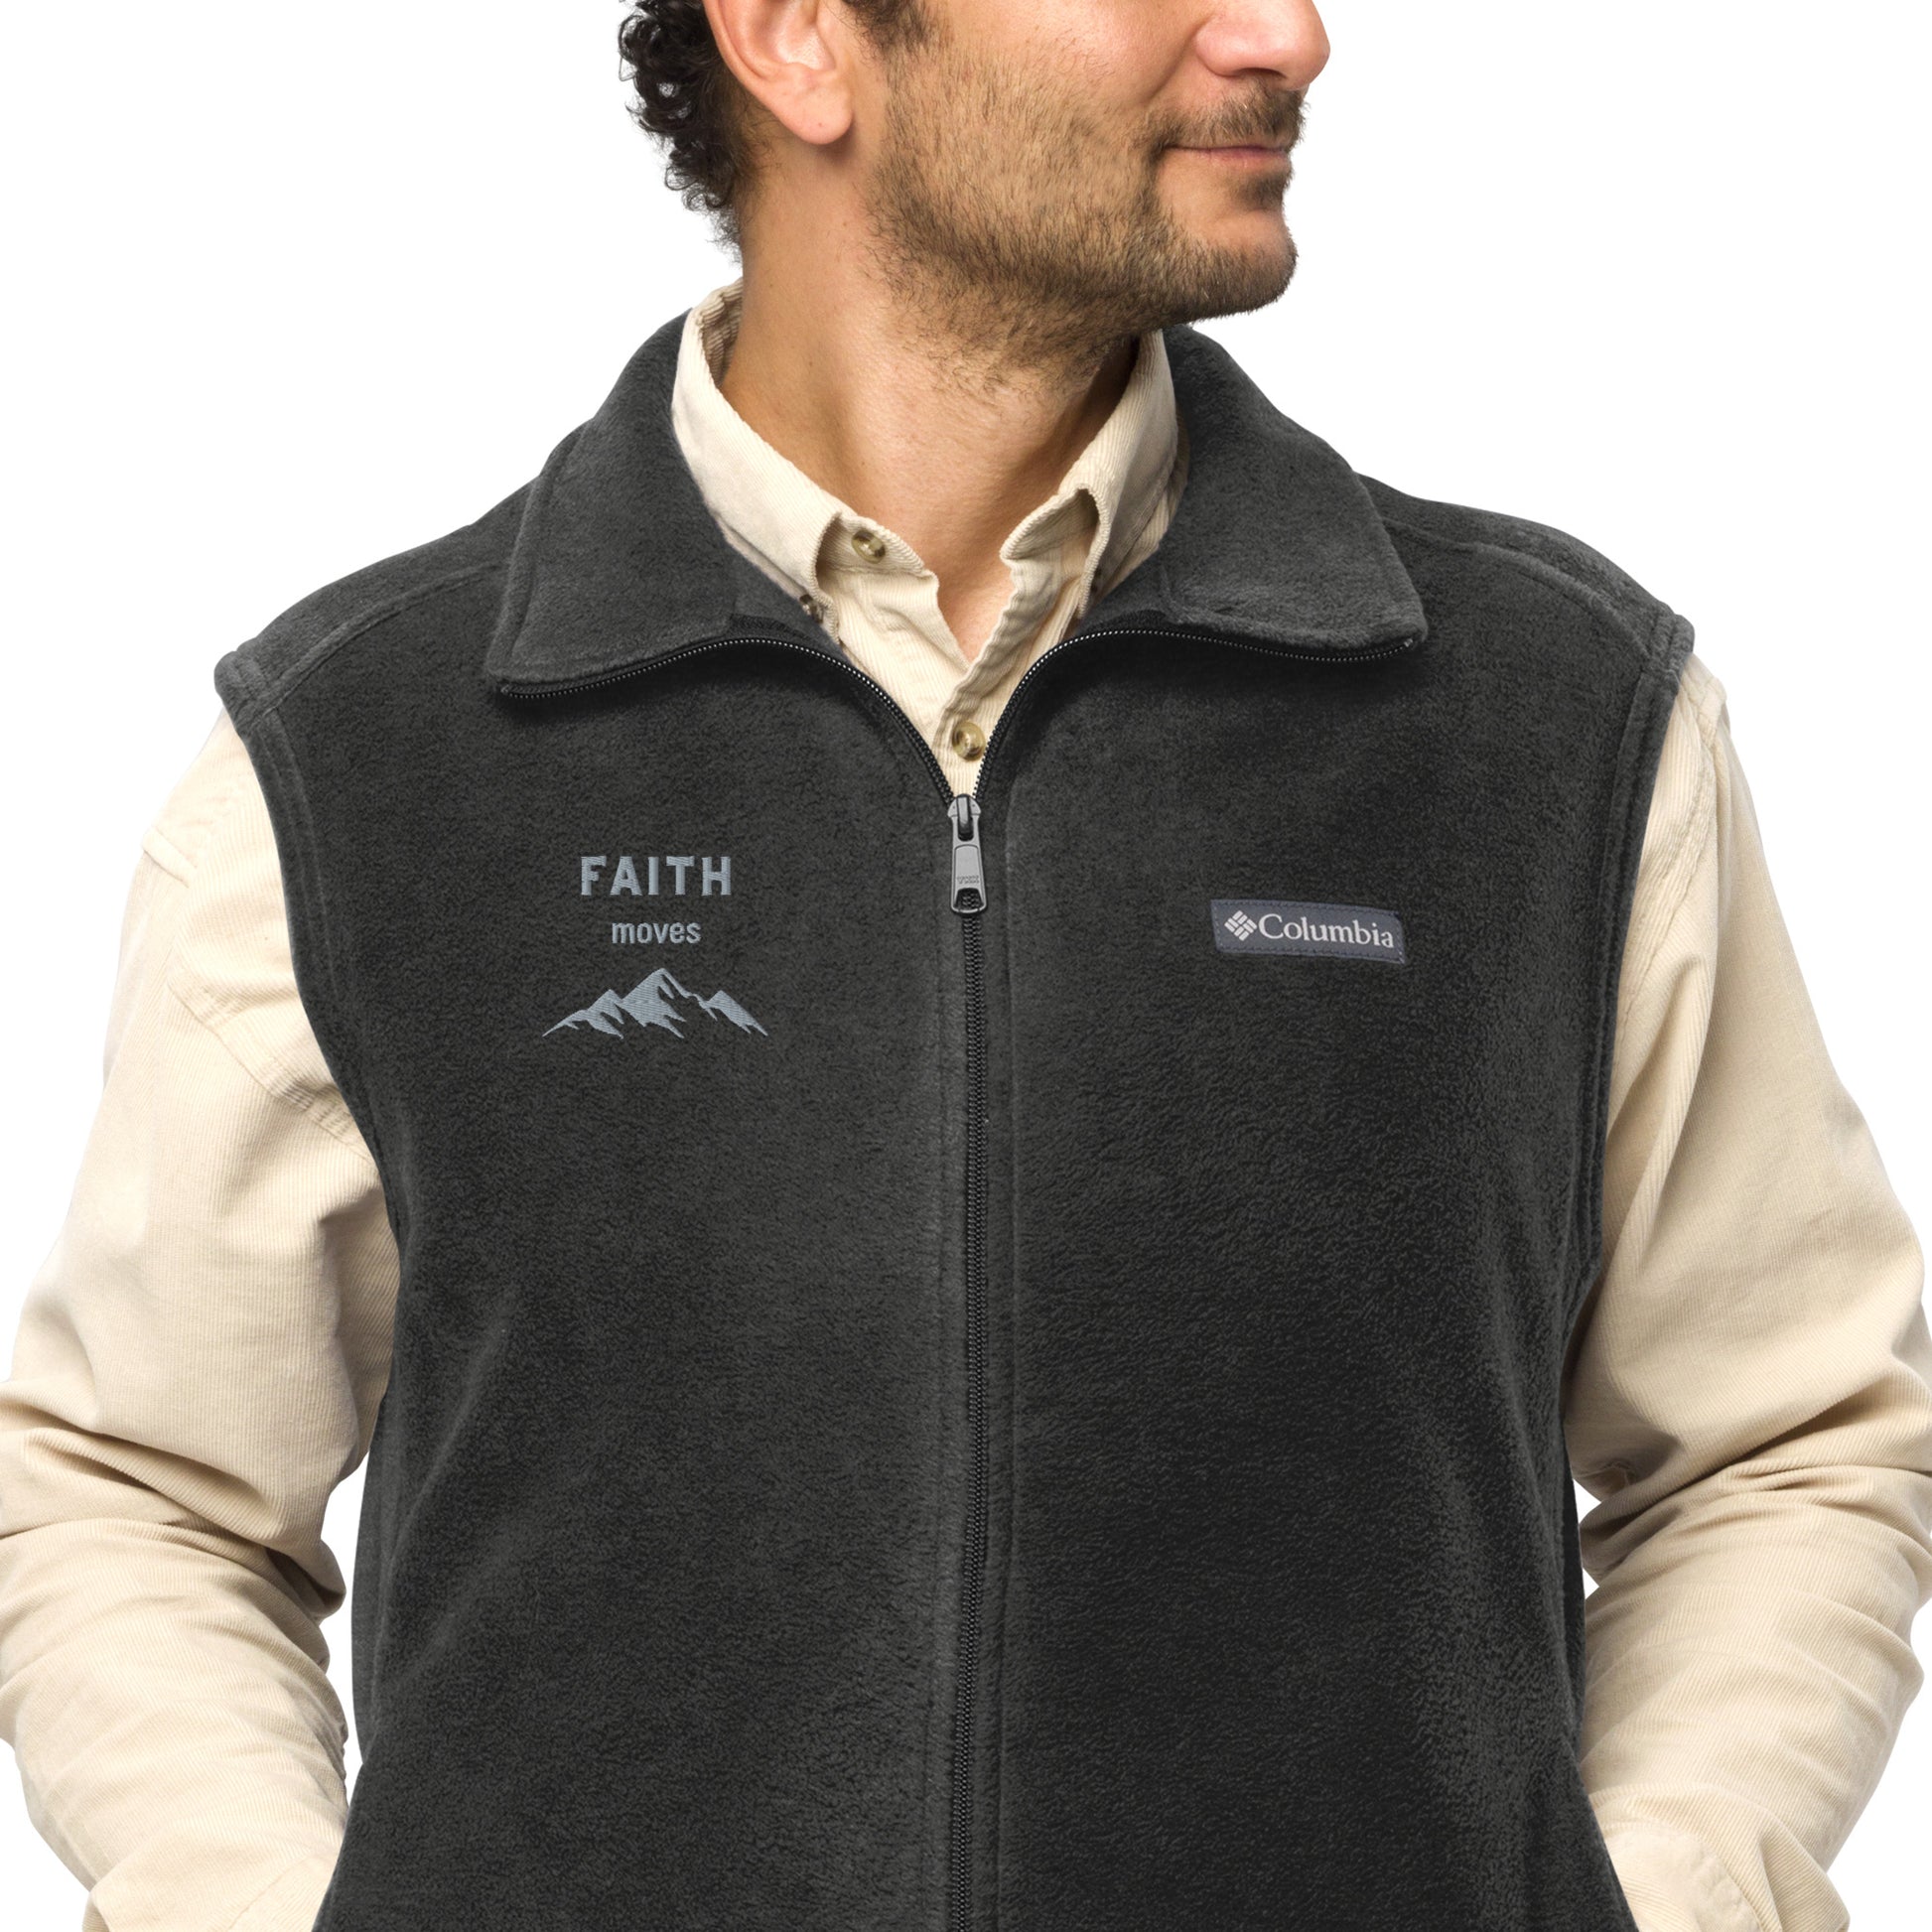 Front partial view of a man from nose to beltline with dark curly hair and short beard and mustache, wearing long-sleeve button-front cream colored shirt and a dark gray or graphite colored Columbia sleeveless vest, zipped up, with the words FAITH moves and a mountain graphic embroidered on the right front chest area.